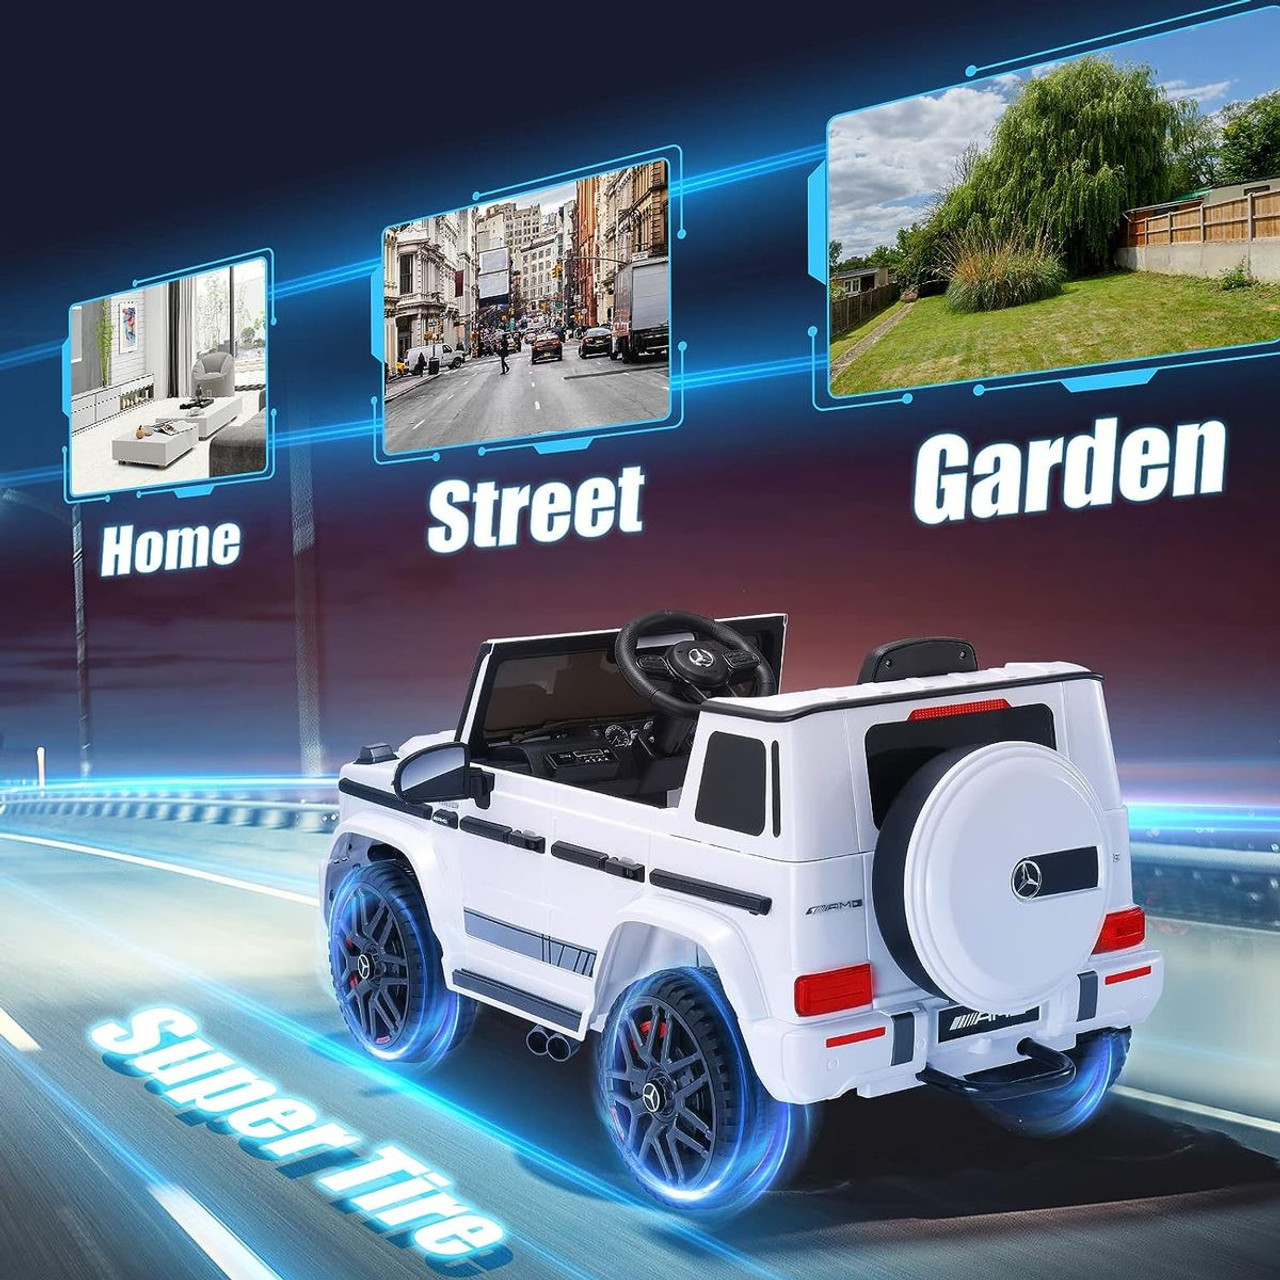 Kids' AMG G-Wagon Ride-on Car with Parent Control product image